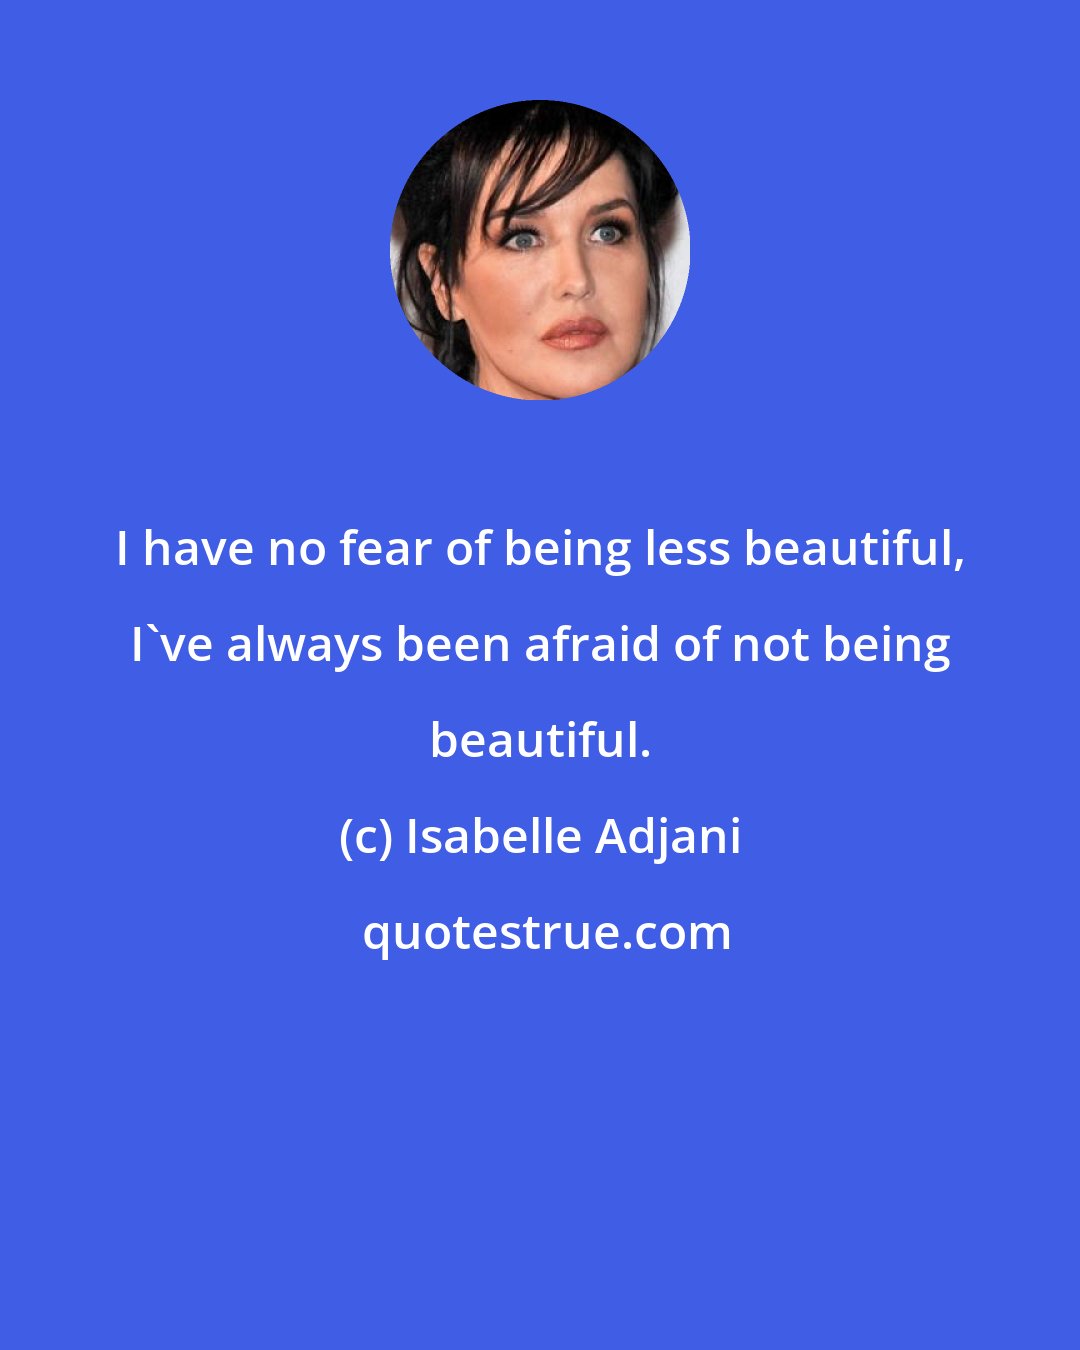 Isabelle Adjani: I have no fear of being less beautiful, I've always been afraid of not being beautiful.